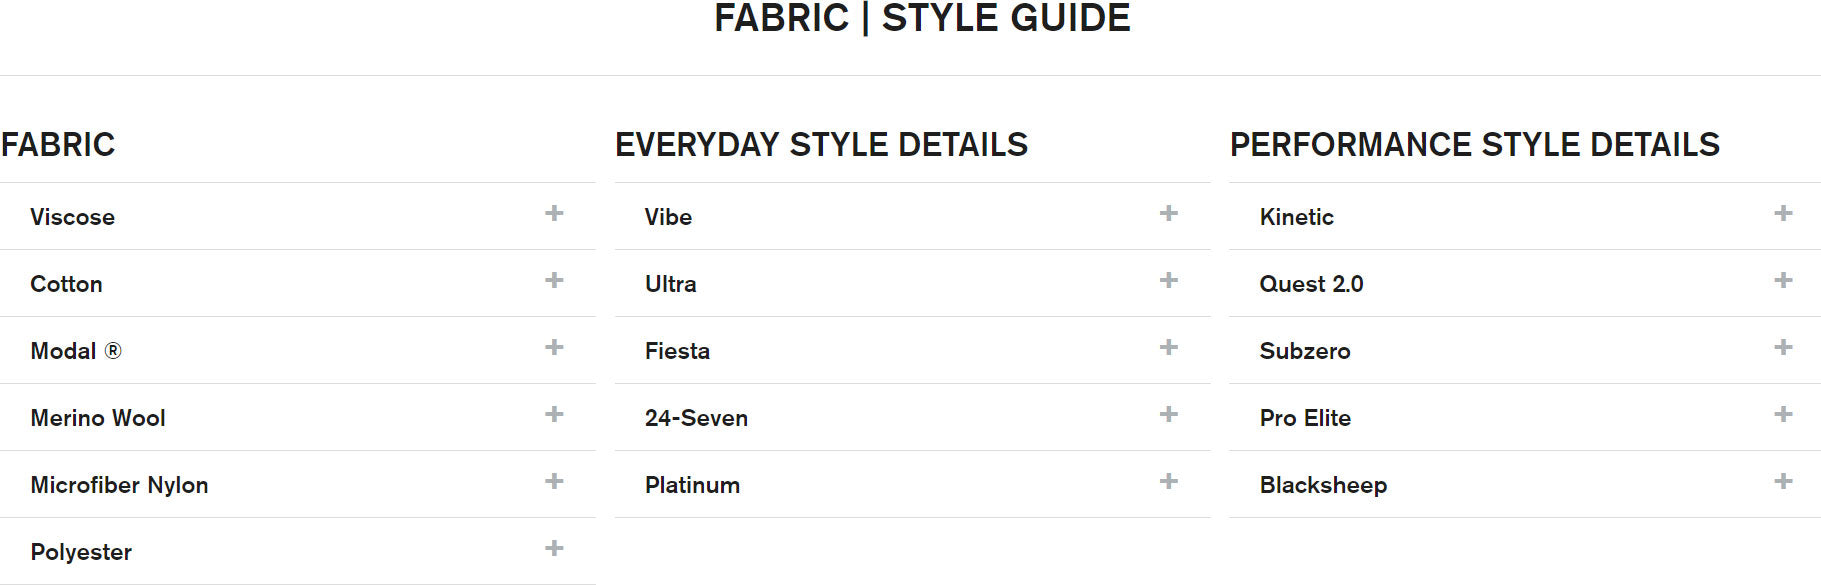 Saxx Fabric Style Guide